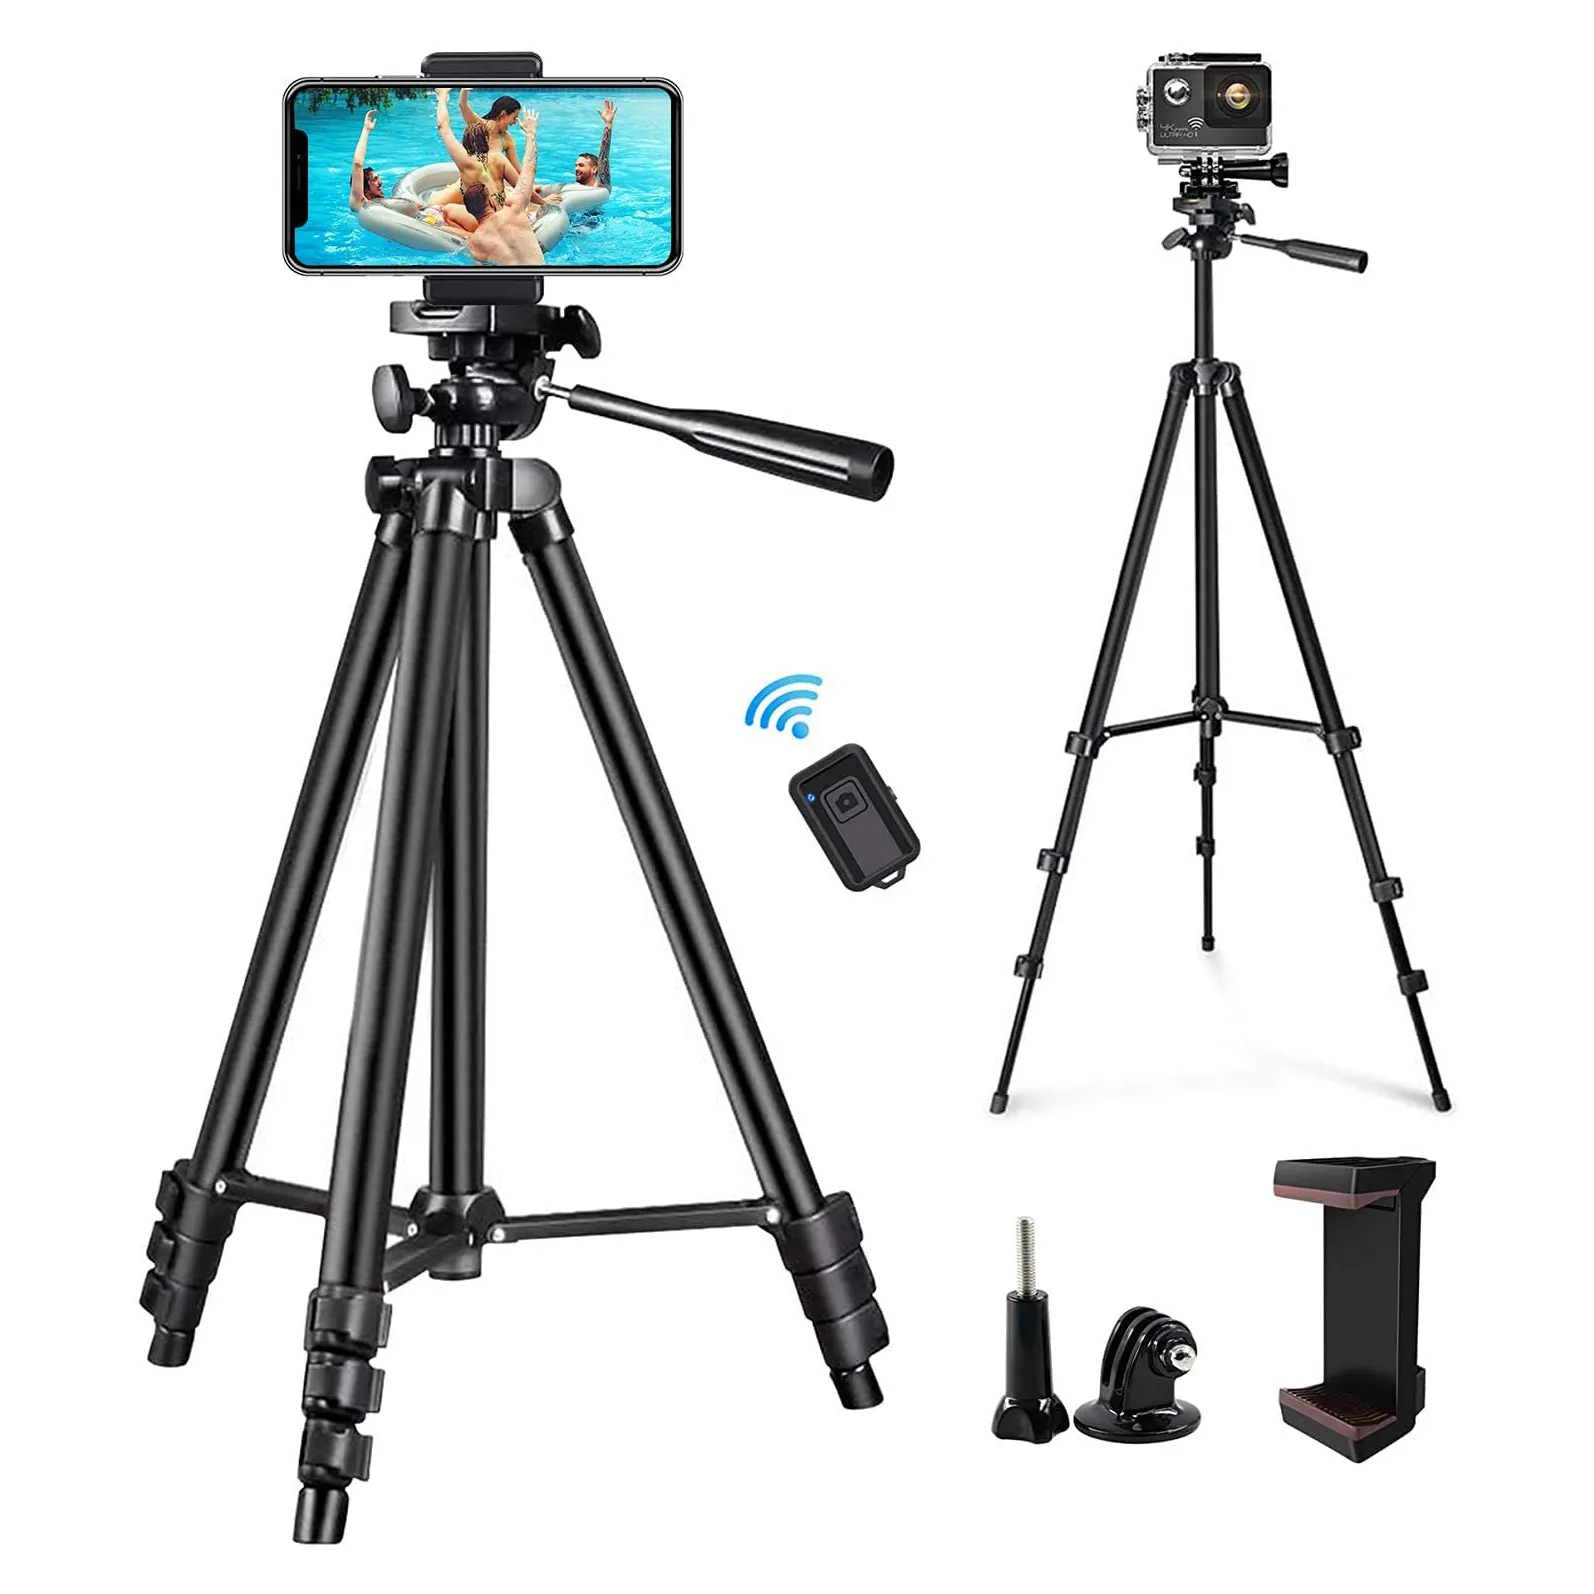 Aluminum Camera Phone Portable Adjustable Tripod With 3-Way Head Light Weight Stand Universal Smartphone Mount